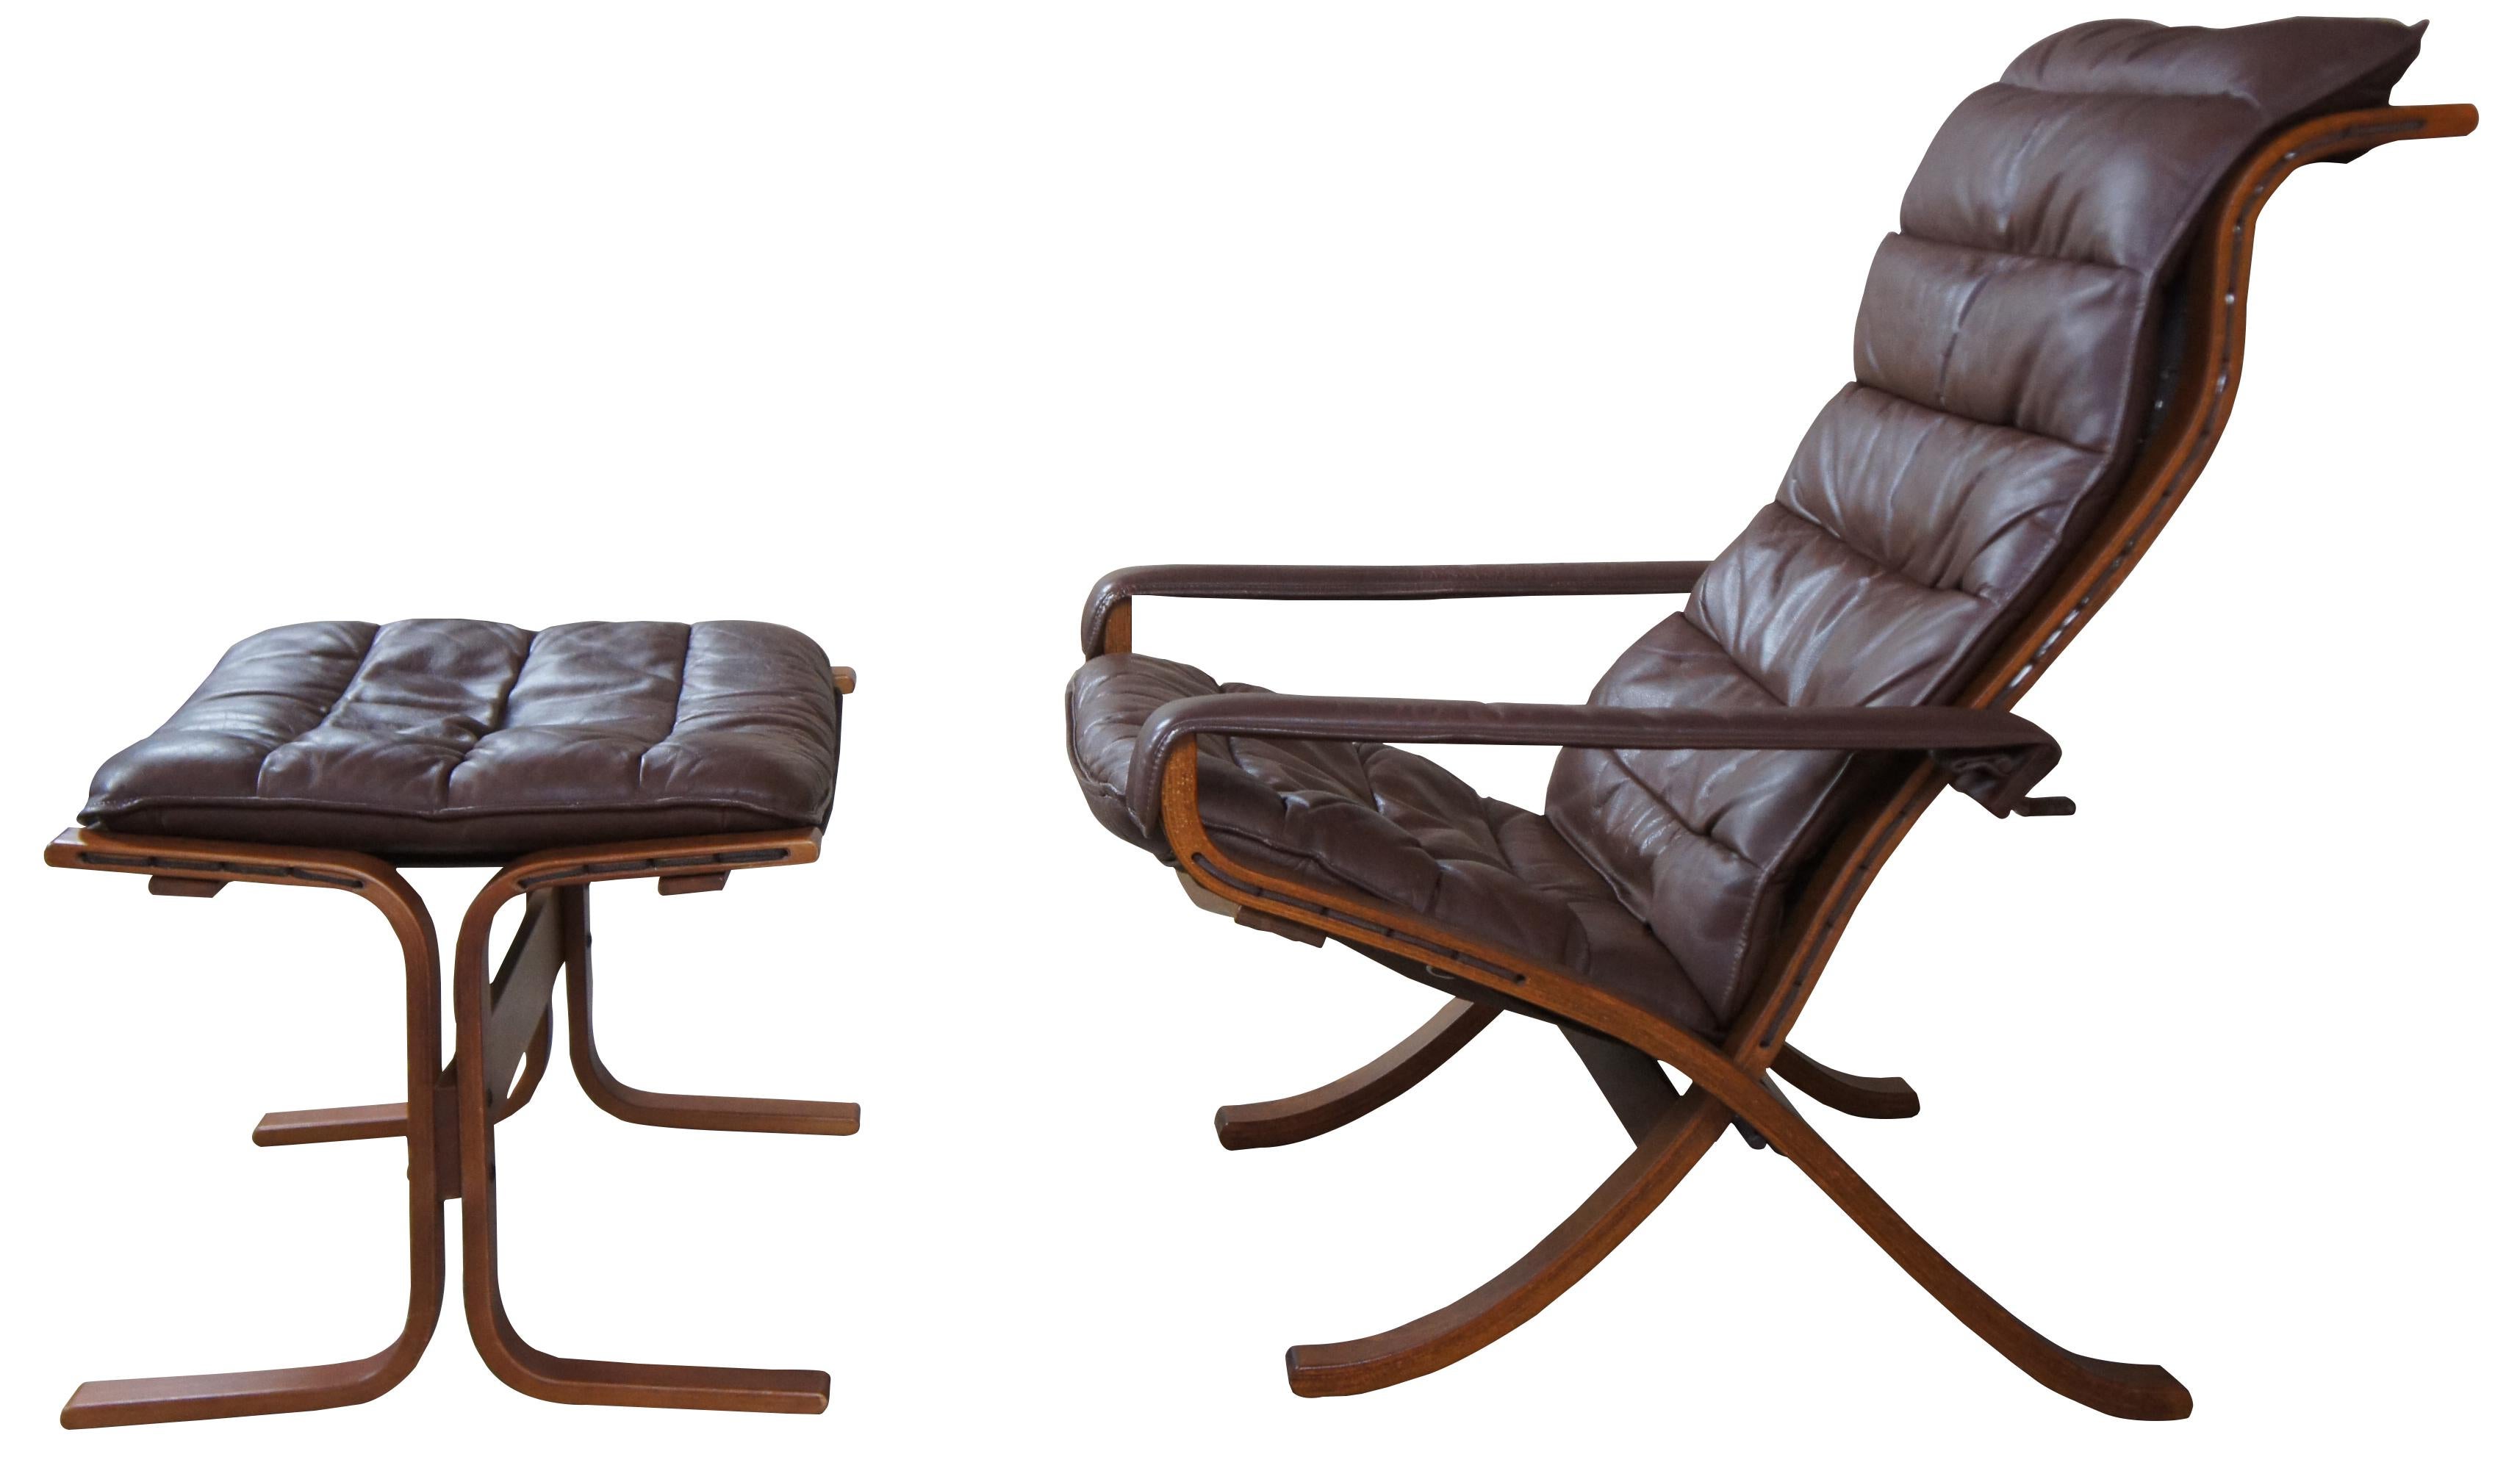 Scandinavian Mid-Century Modern flex (folding) lounge chair and ottoman designed by Ingmar Relling and produced in Norway by Westnofa Furniture. Made from teak. Siesta.

Measures: Chair 30